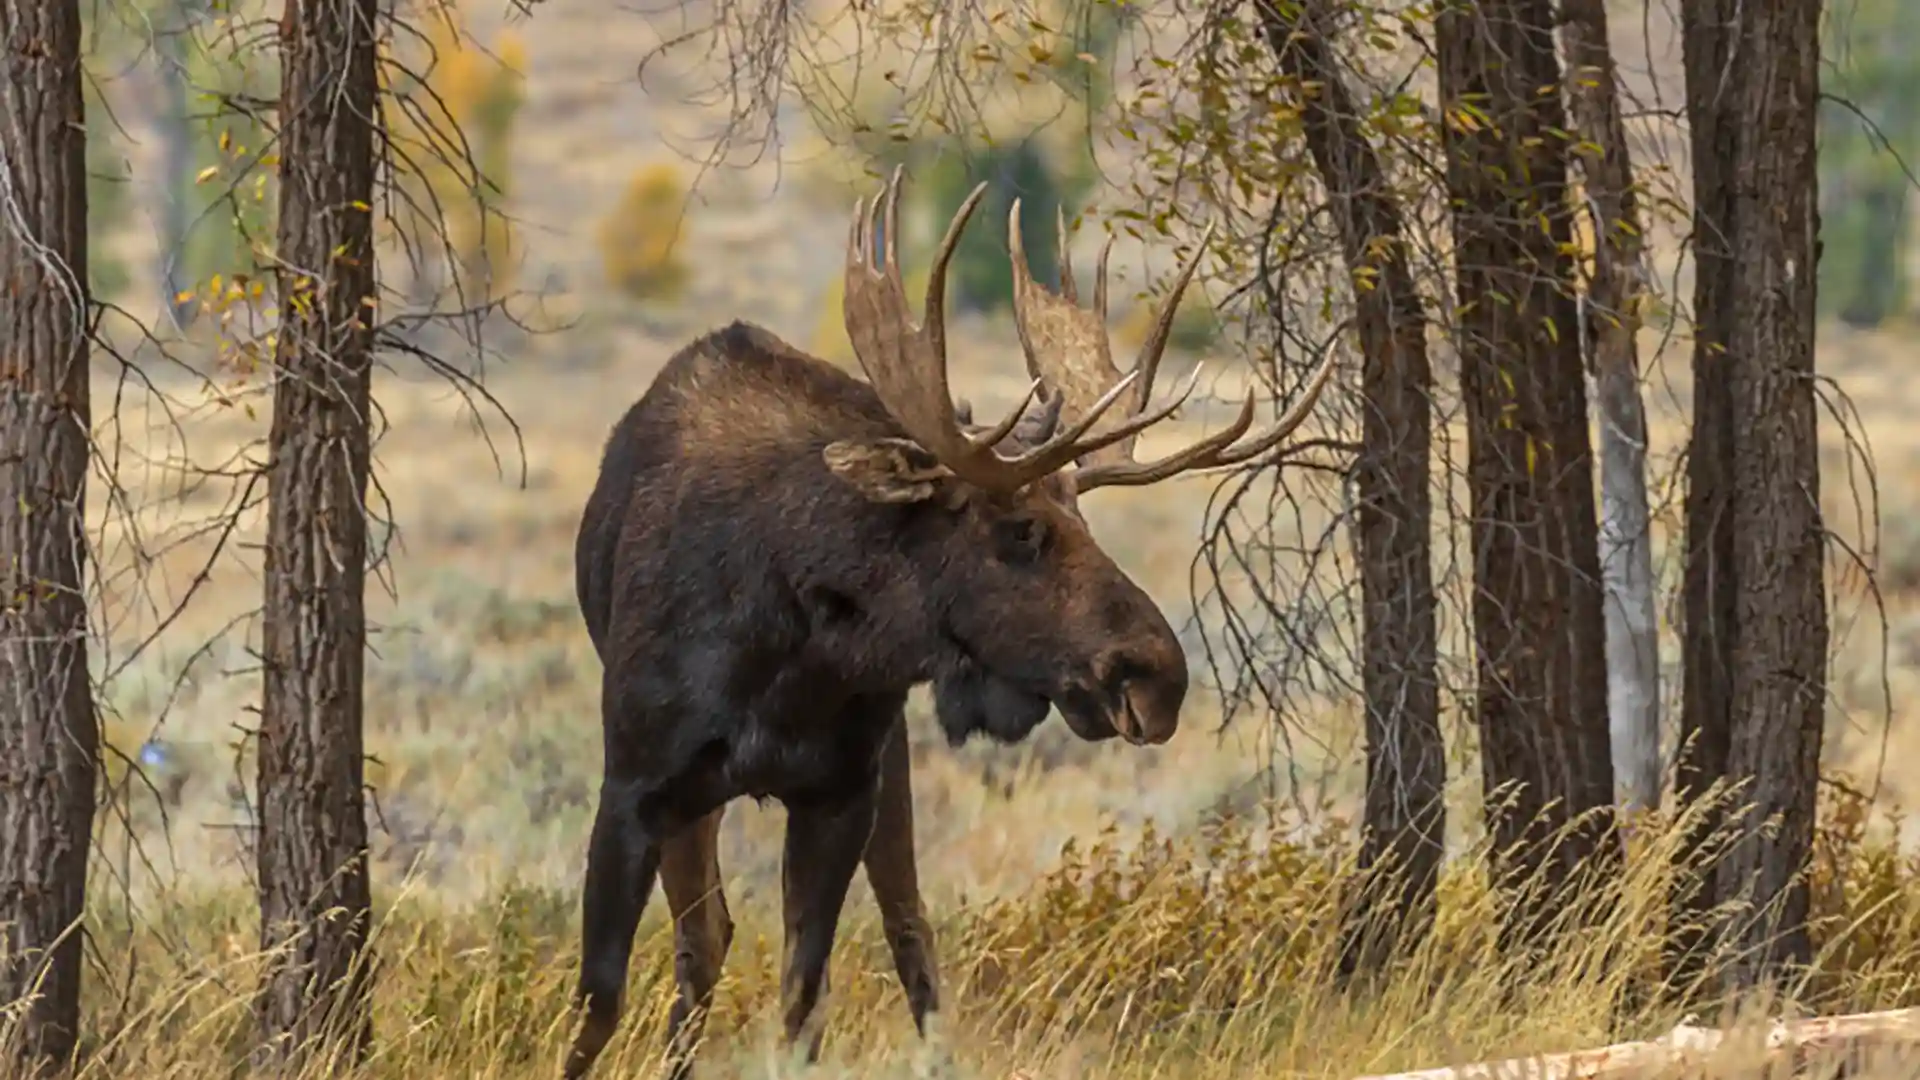 View of moose in Alaska forest.